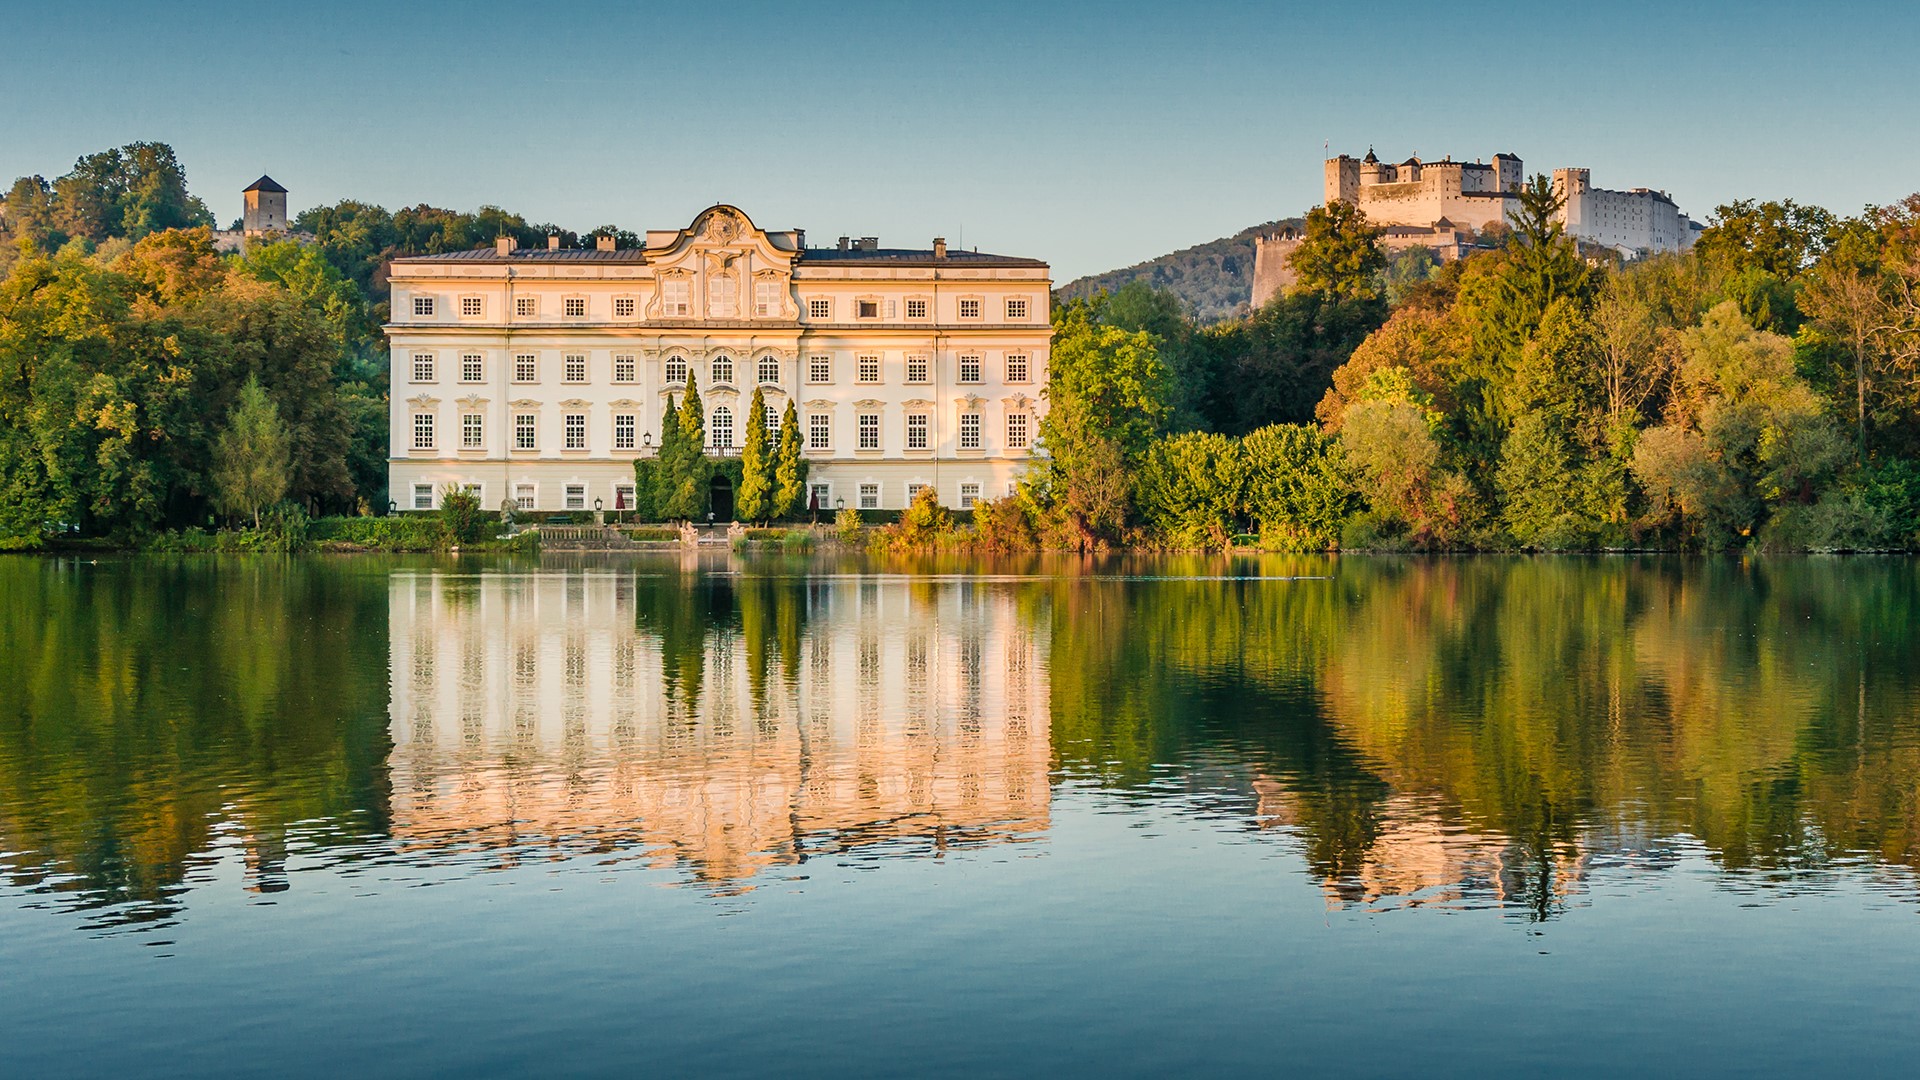 General 1920x1080 landscape trees water water ripples sky Schloss Leopoldskron Fortress Hohensalzburg fortress hotel architecture Austria